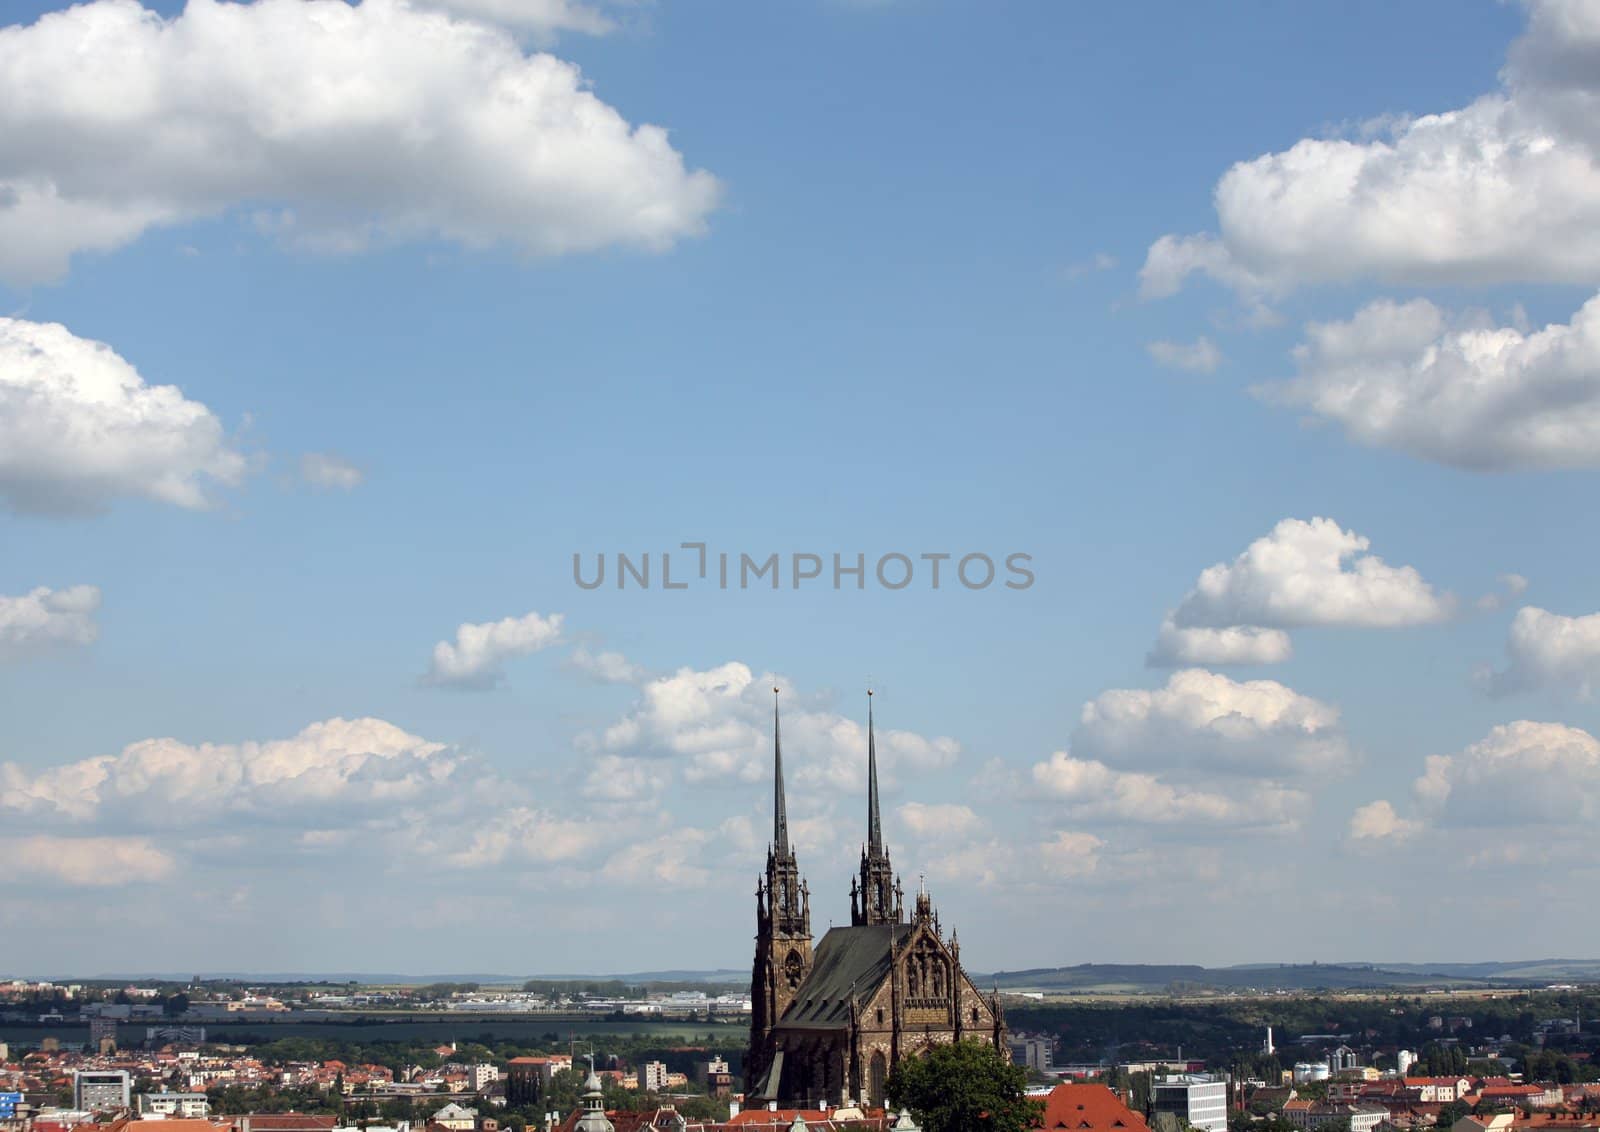 Brno cathedral of saint Peter and Paul in Brno, Czech republic